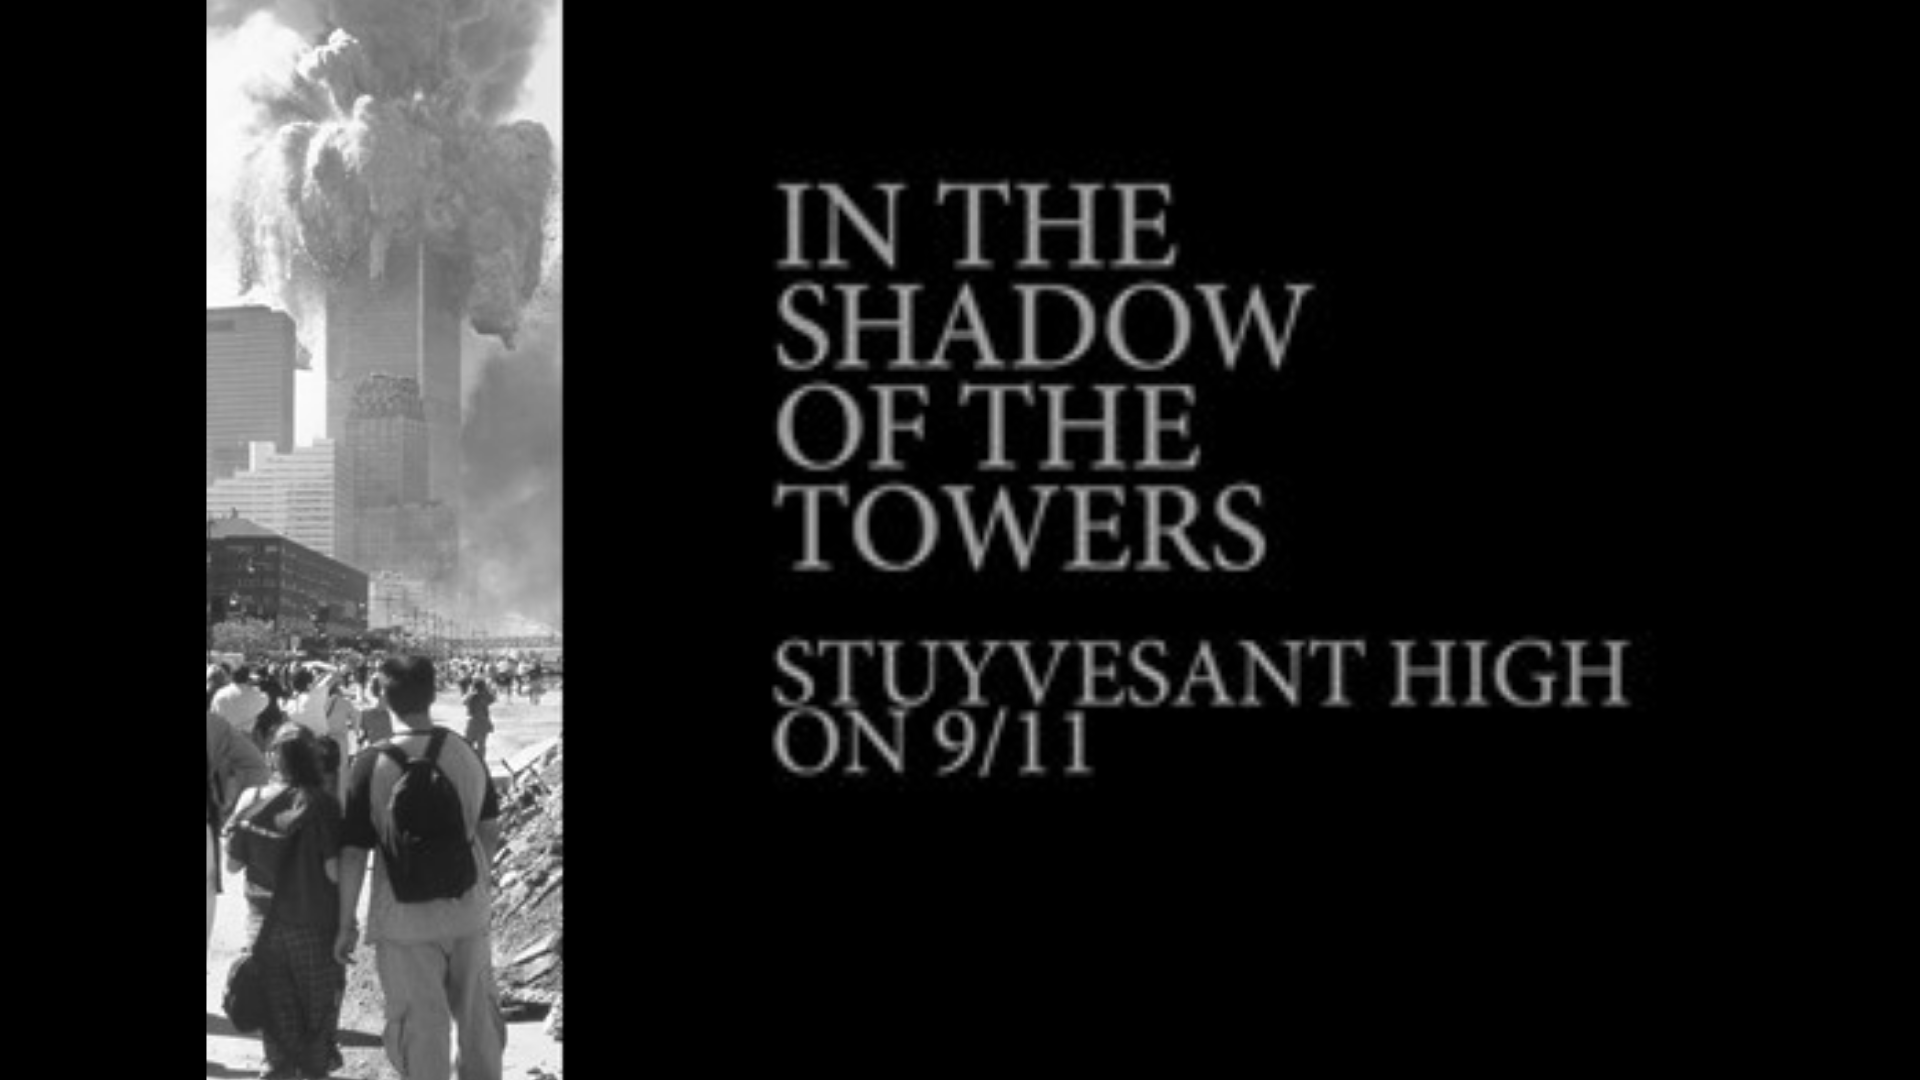 In the Shadows of the Towers: Stuyvesant High on 9/11